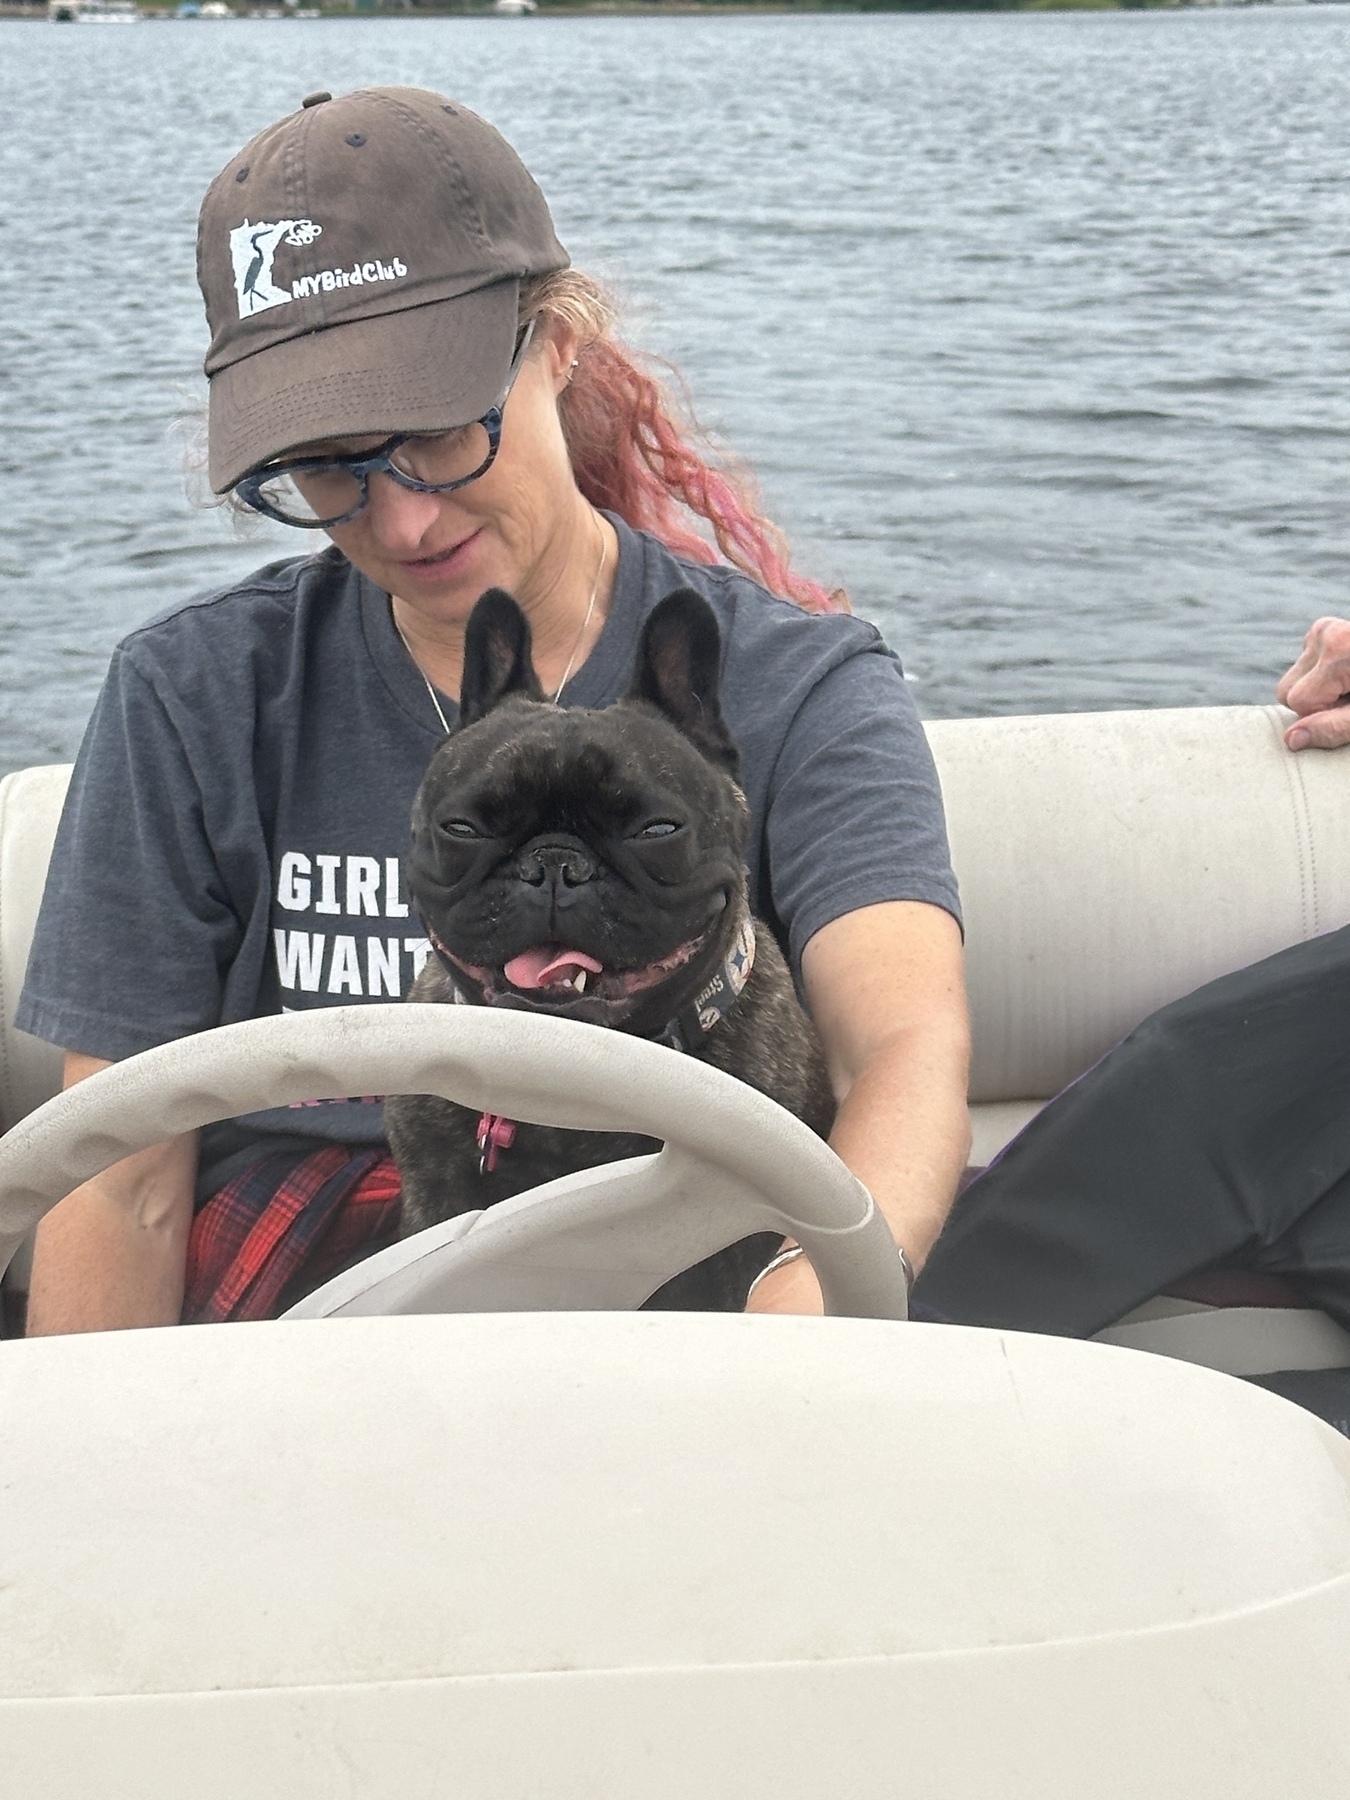 Juju the Frenchie helps drive the boat 